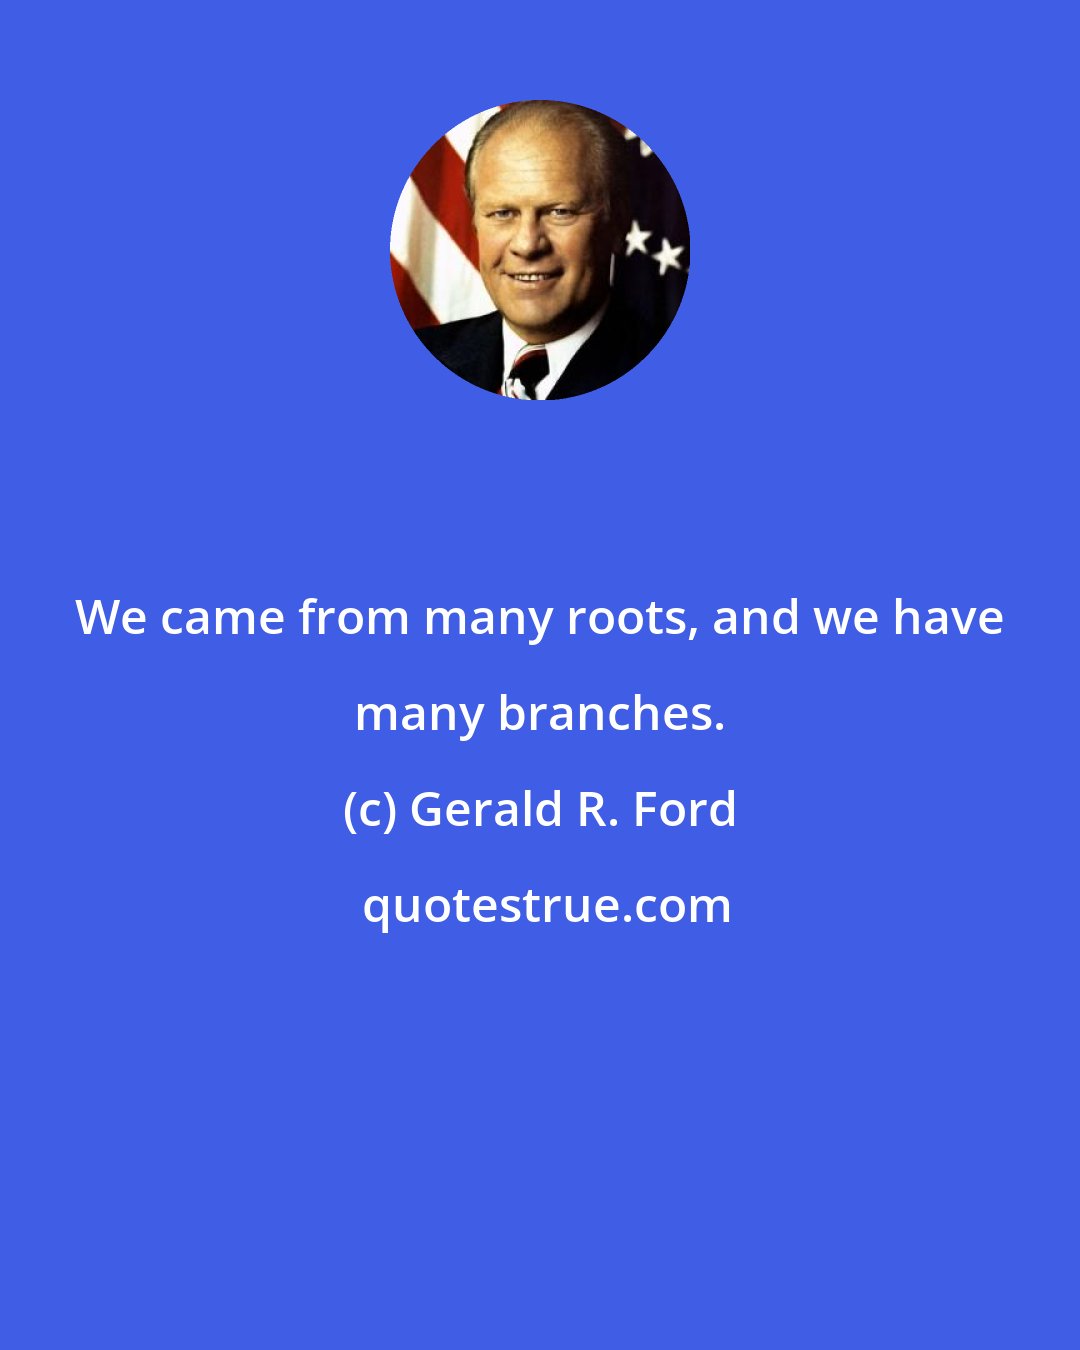 Gerald R. Ford: We came from many roots, and we have many branches.